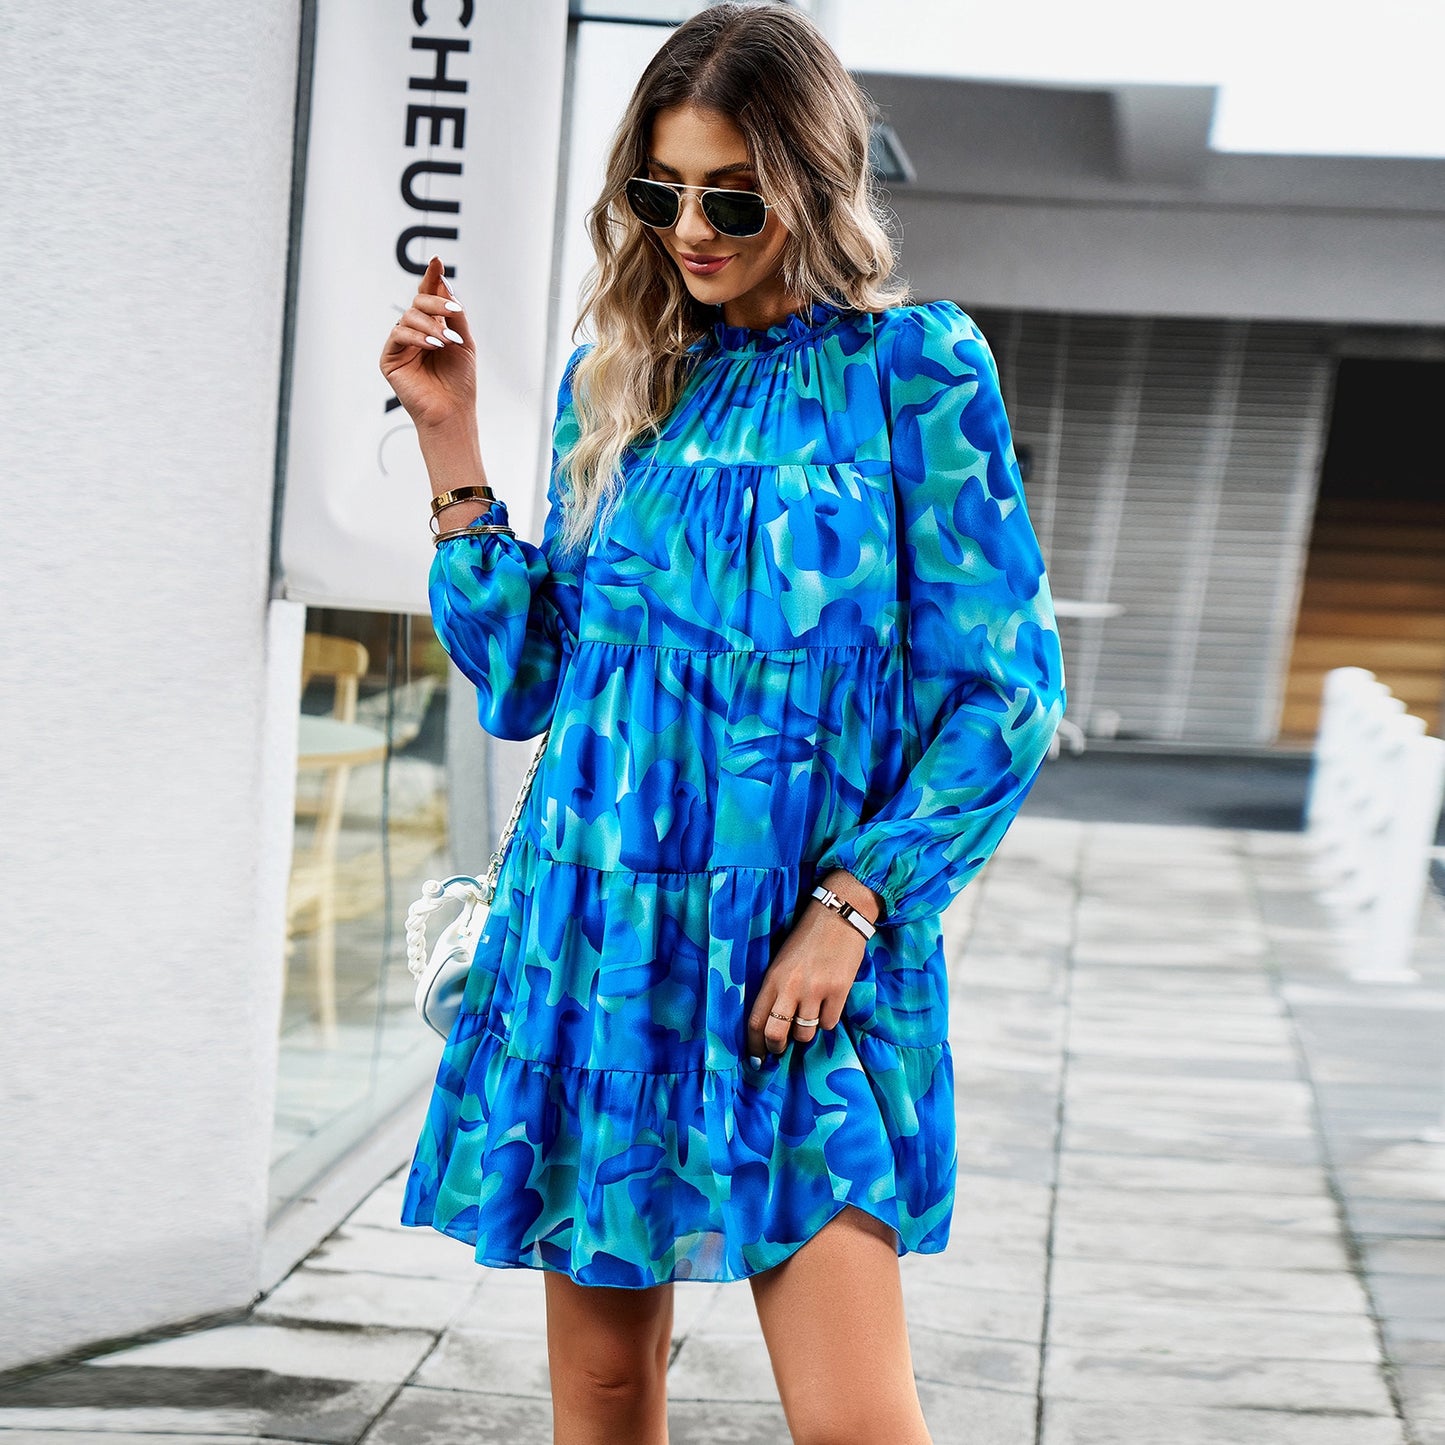 Women's New Spring Autumn Printed Dress For Ladies O Neck Long Sleeve Loose Pleated Fashion Dresses - WD8086